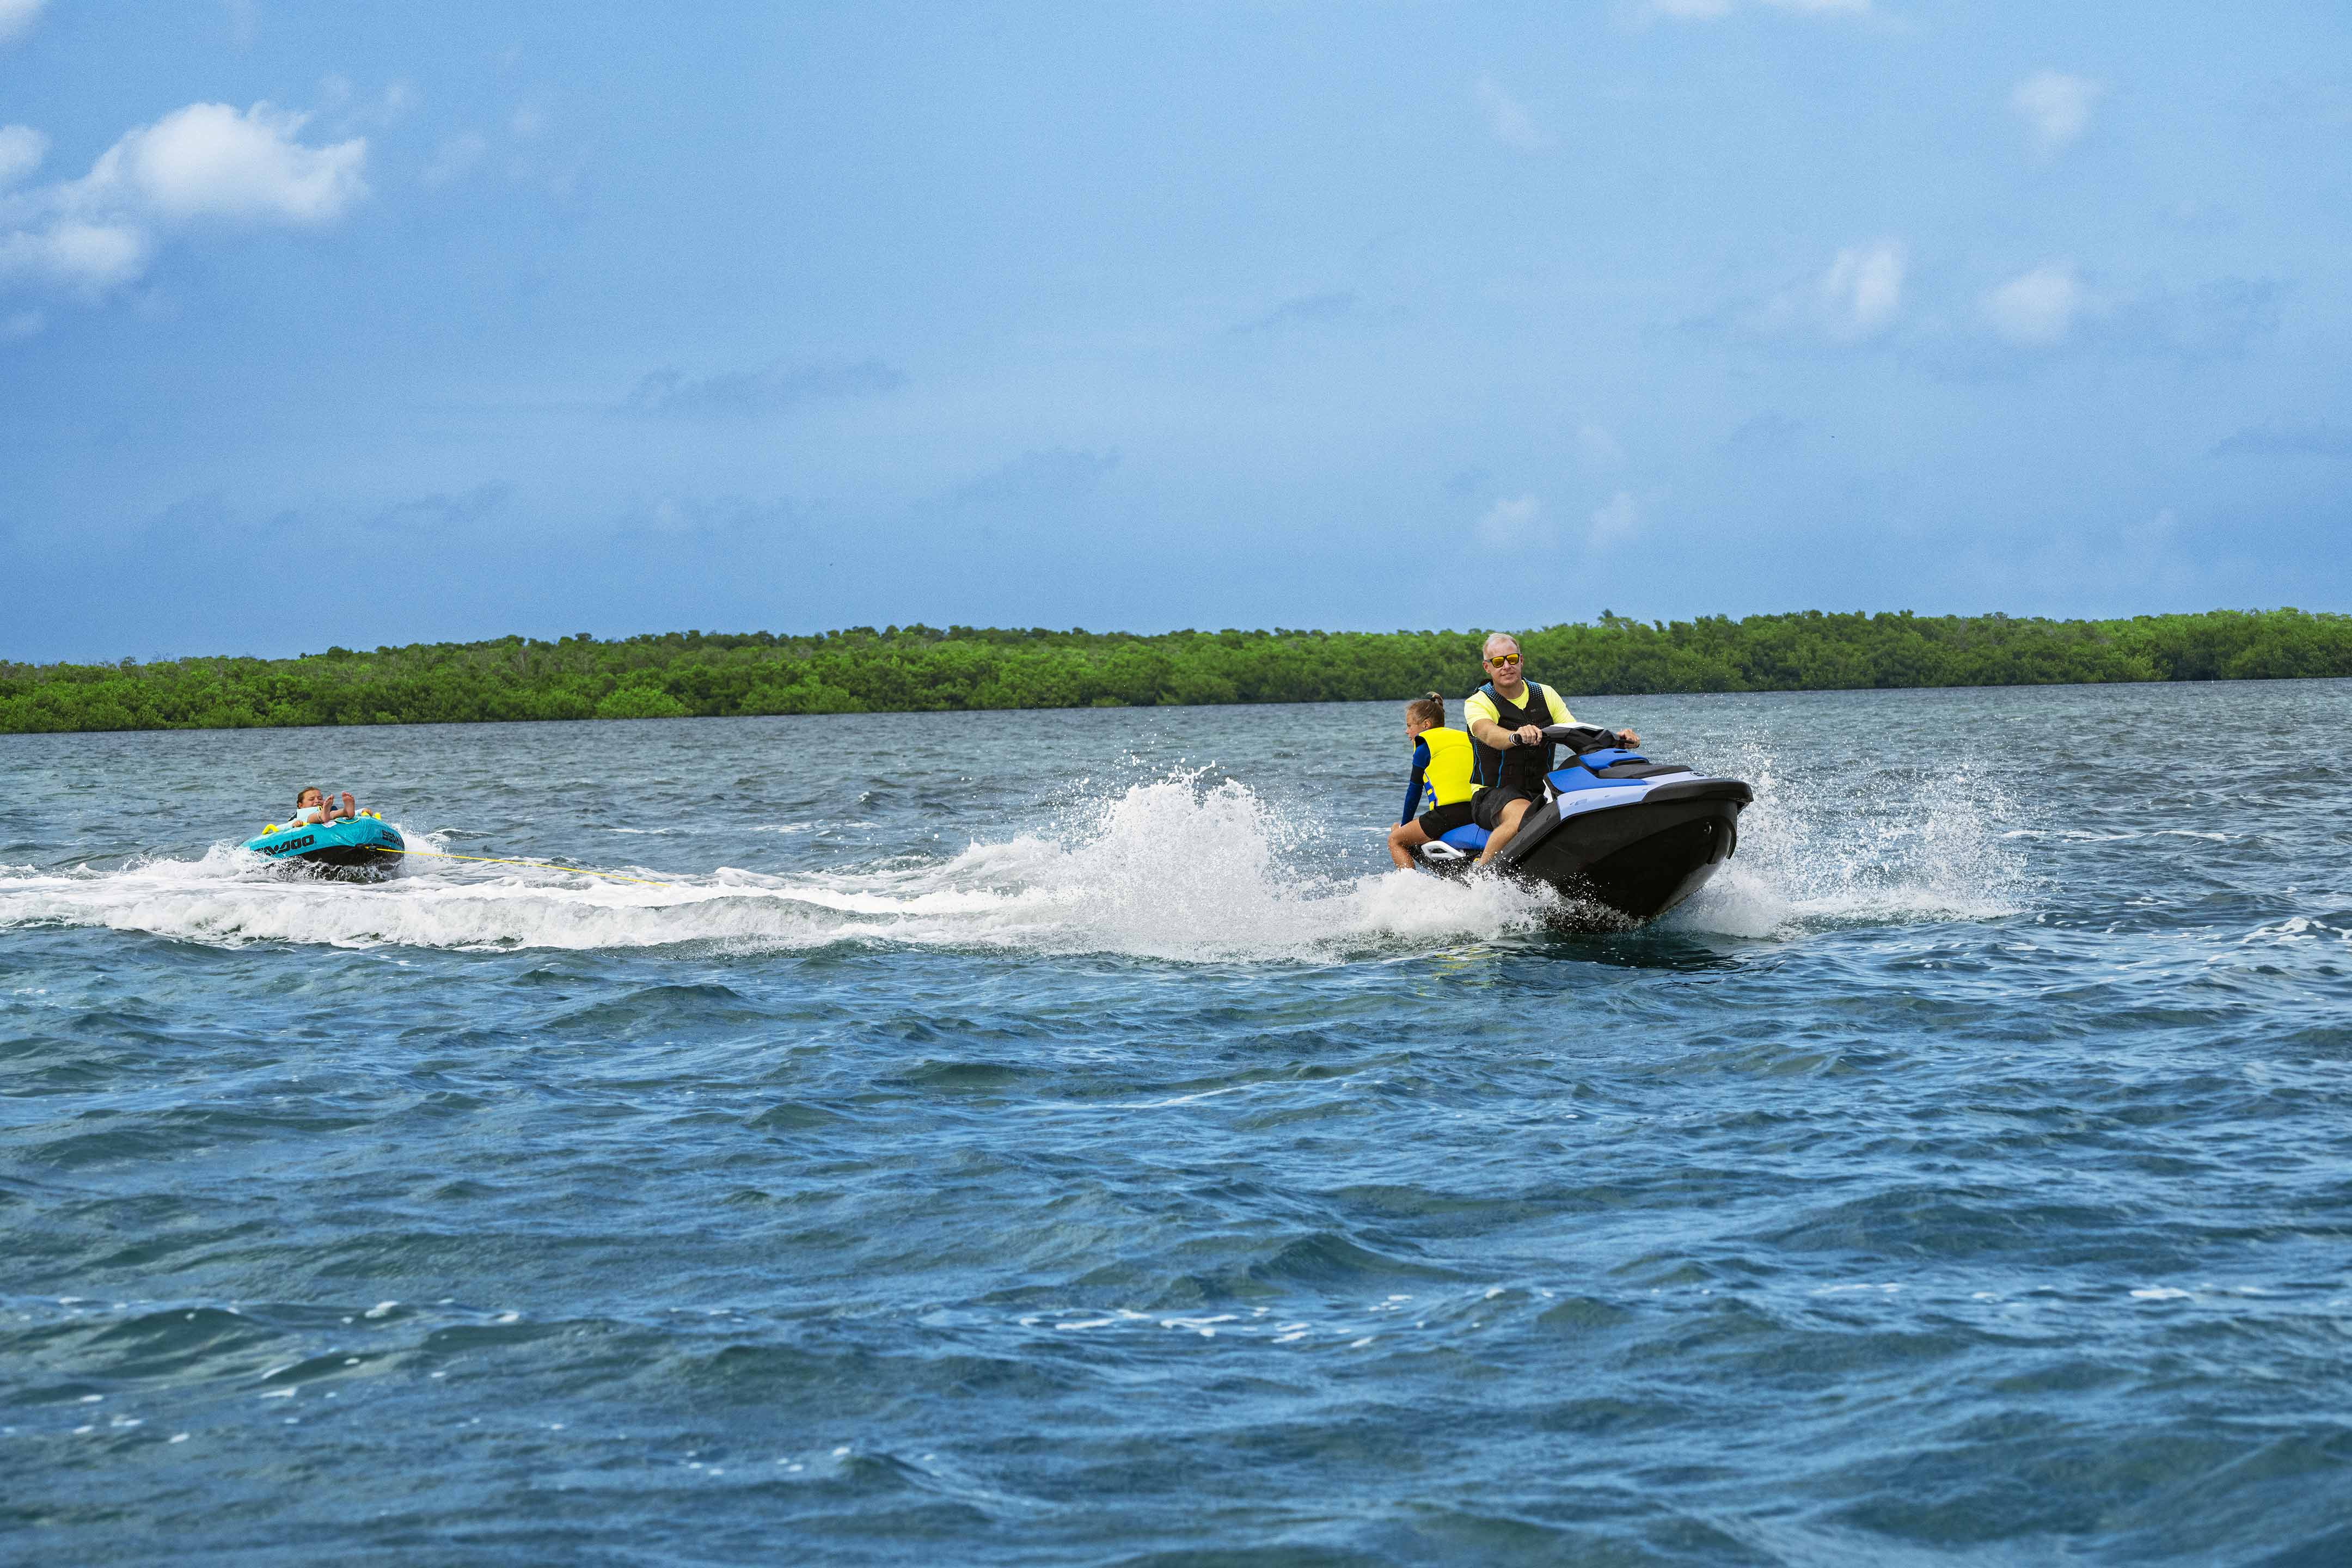 Dad and his daughters enjoying a ride on a Sea-Doo Spark personal watercraft